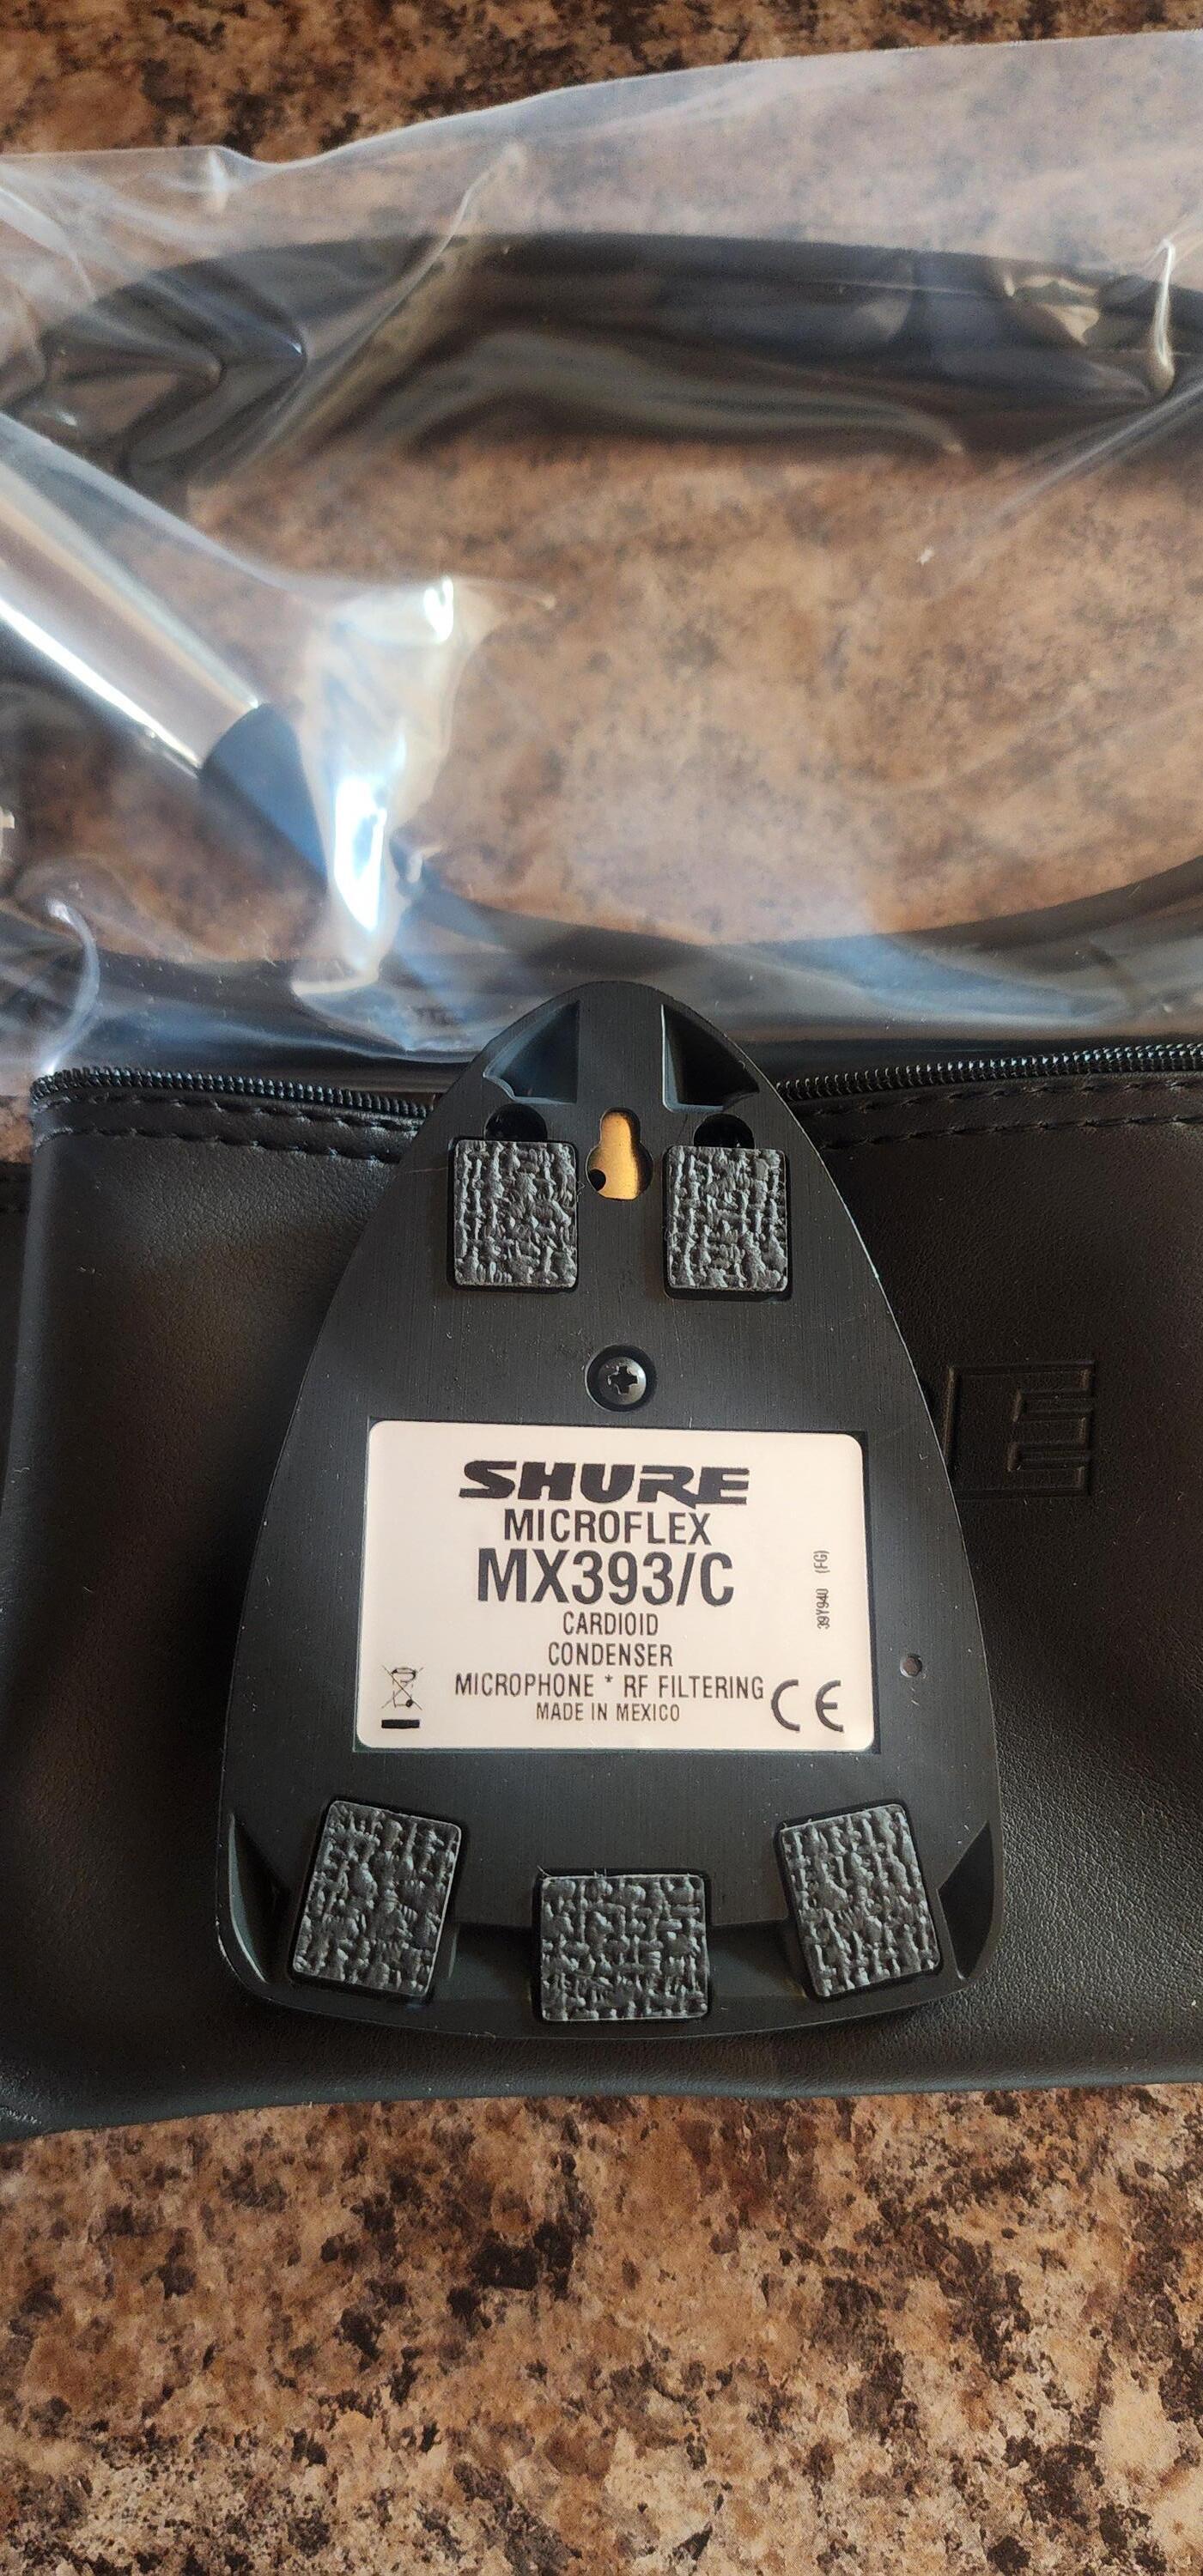 Used Shure New in box MX393/C Microflex Cardioid Boundary Microphone